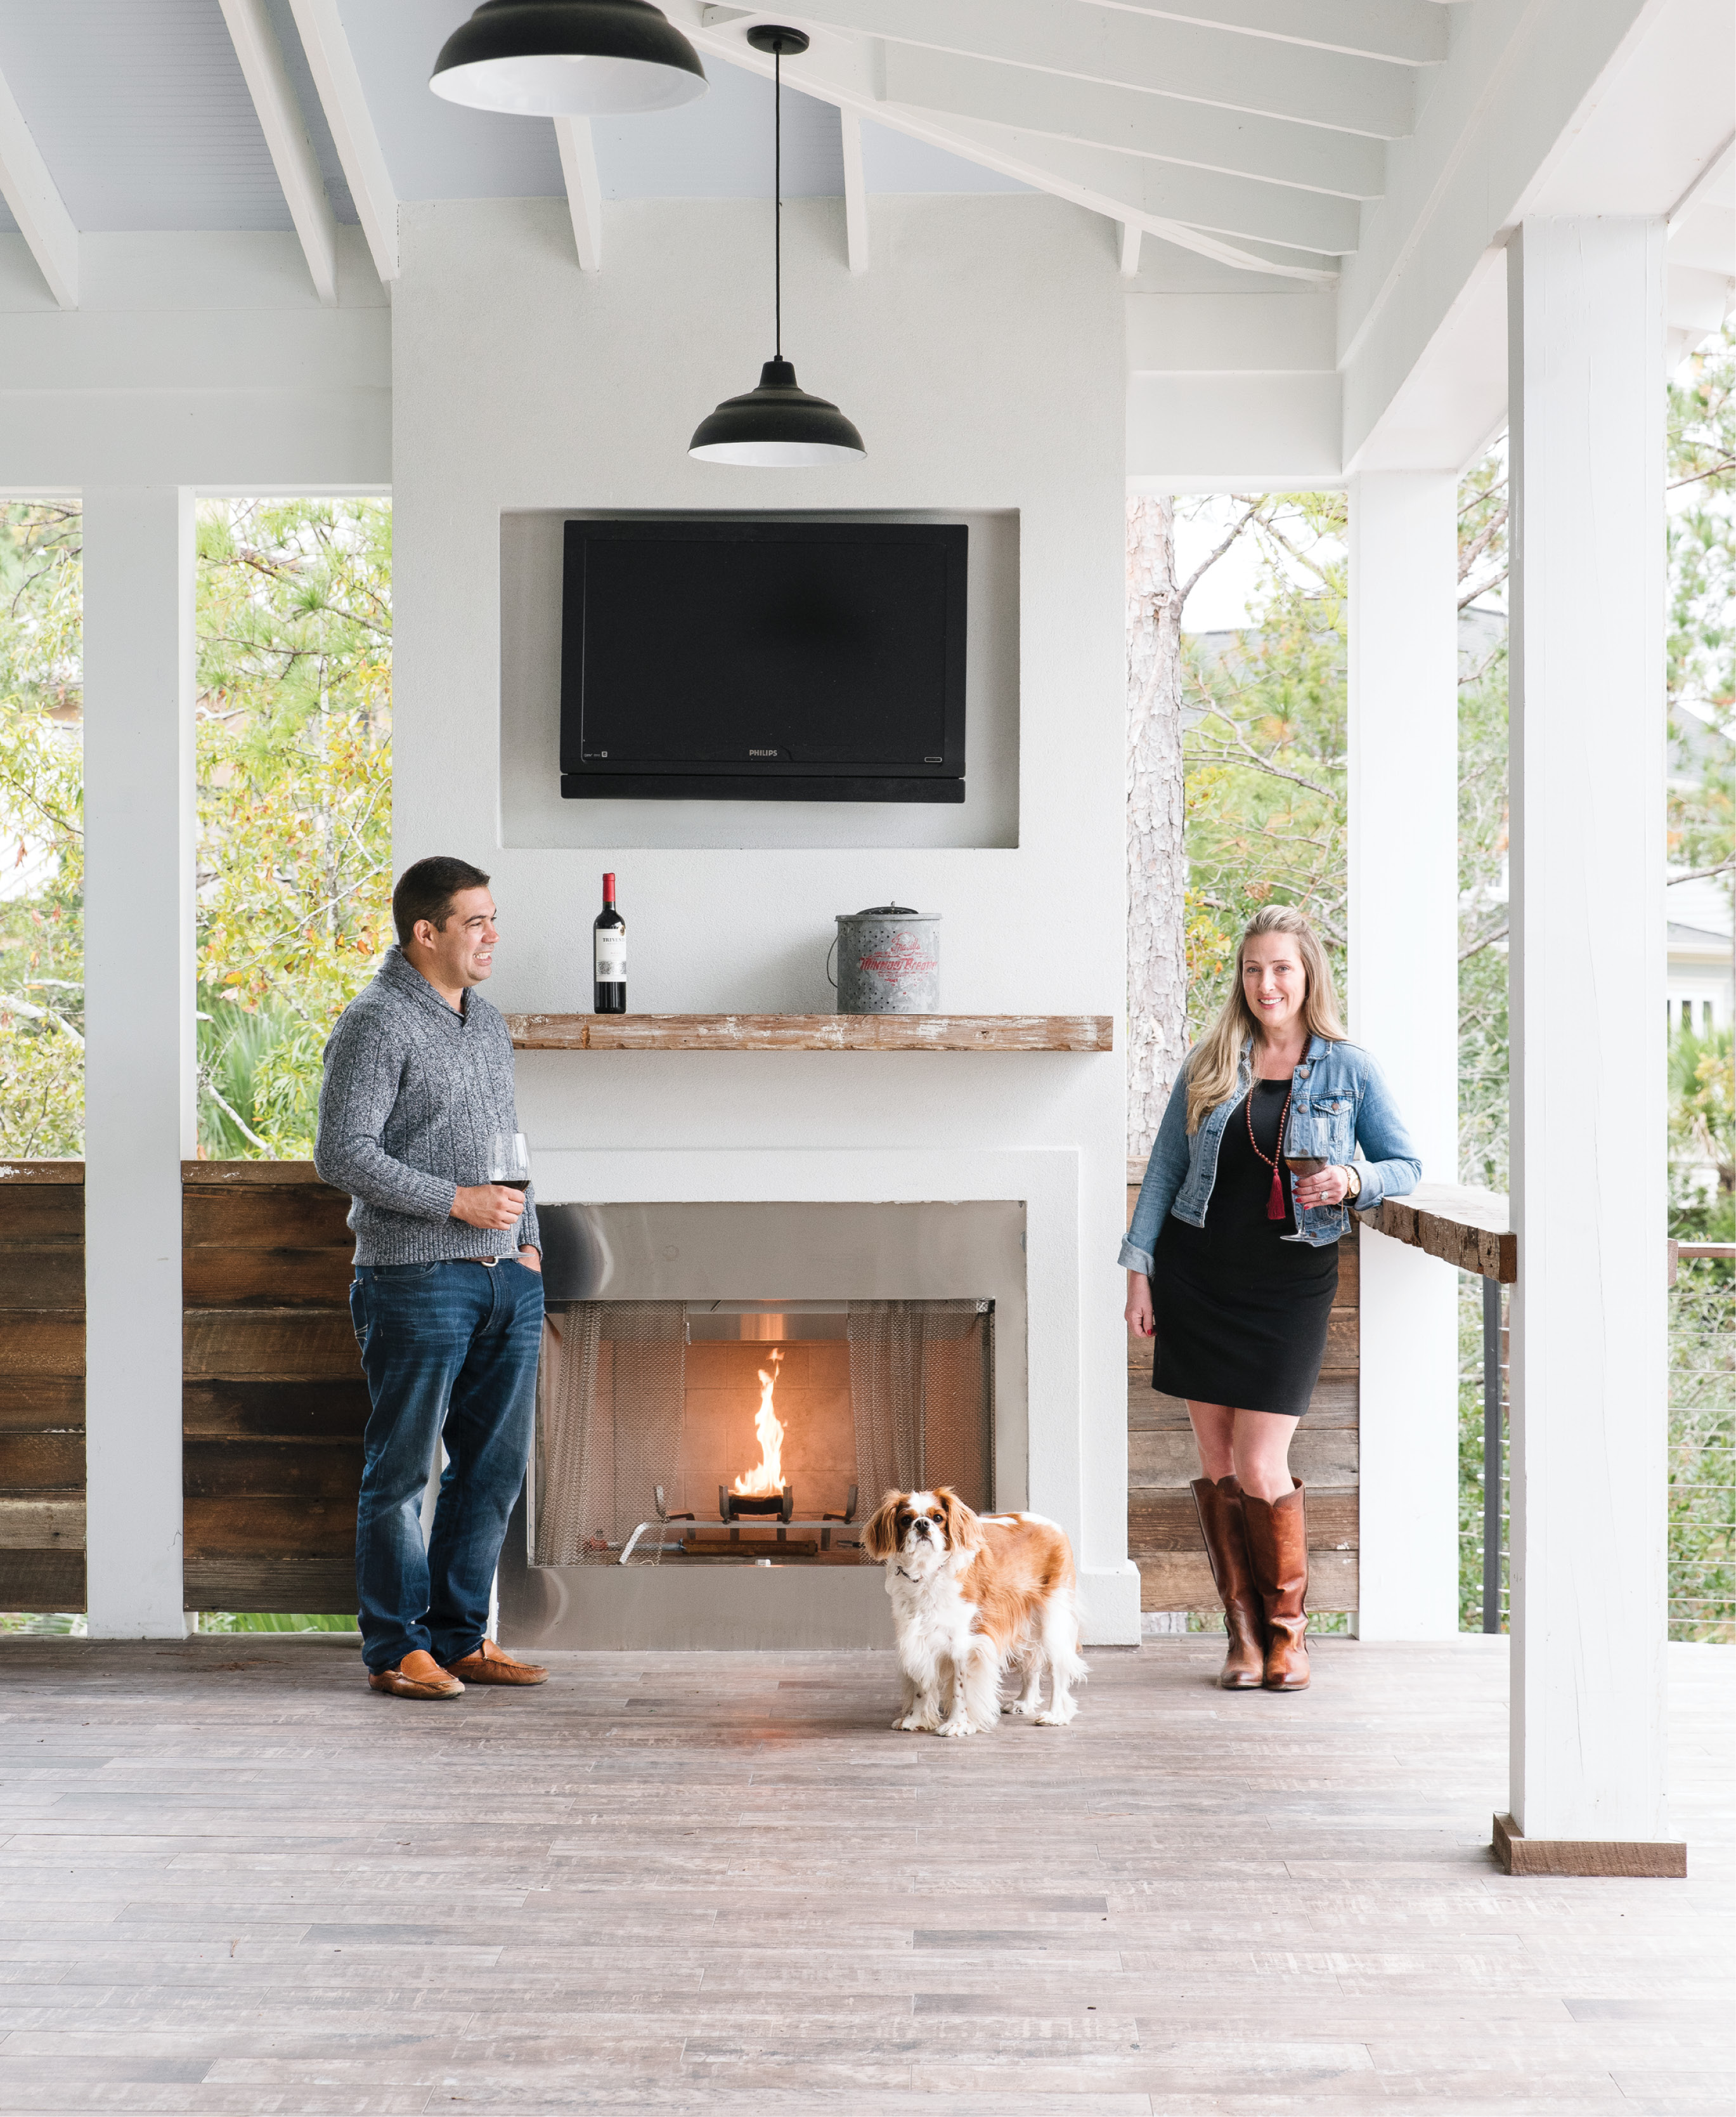 Cooler temps don’t keep Melissa and Valmar Nunes and their adorable pup, Mason, cooped up indoors. The couple designed their RiverTowne abode—complete with a marsh-front pool, open-air kitchen, and this alfresco fireplace—for outdoor entertaining year-round.